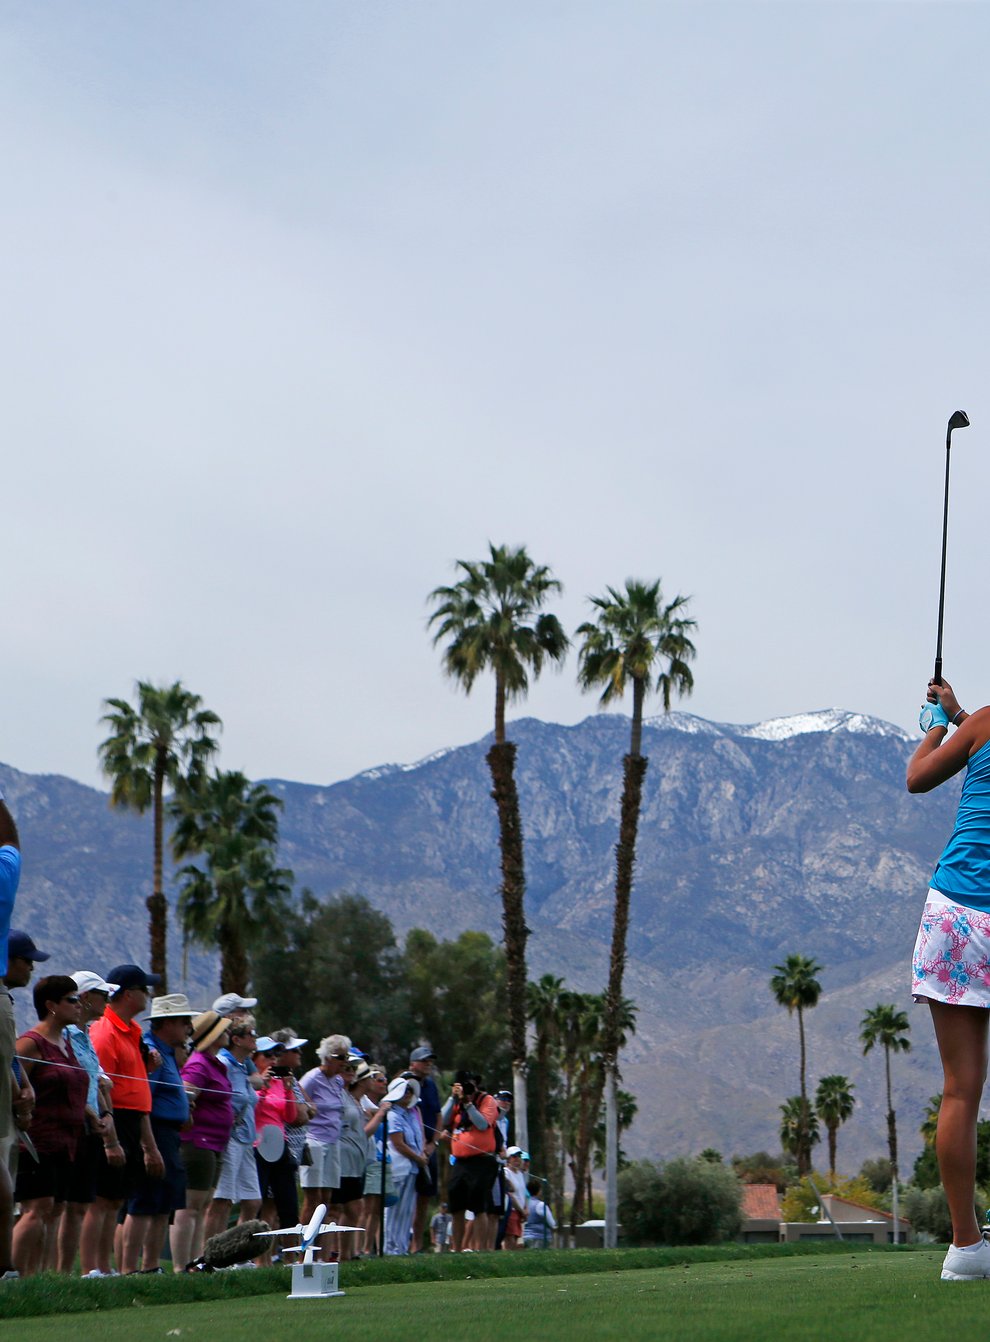 The LPGA are monitoring temperatures and air quality ahead of the ANA Inspiration